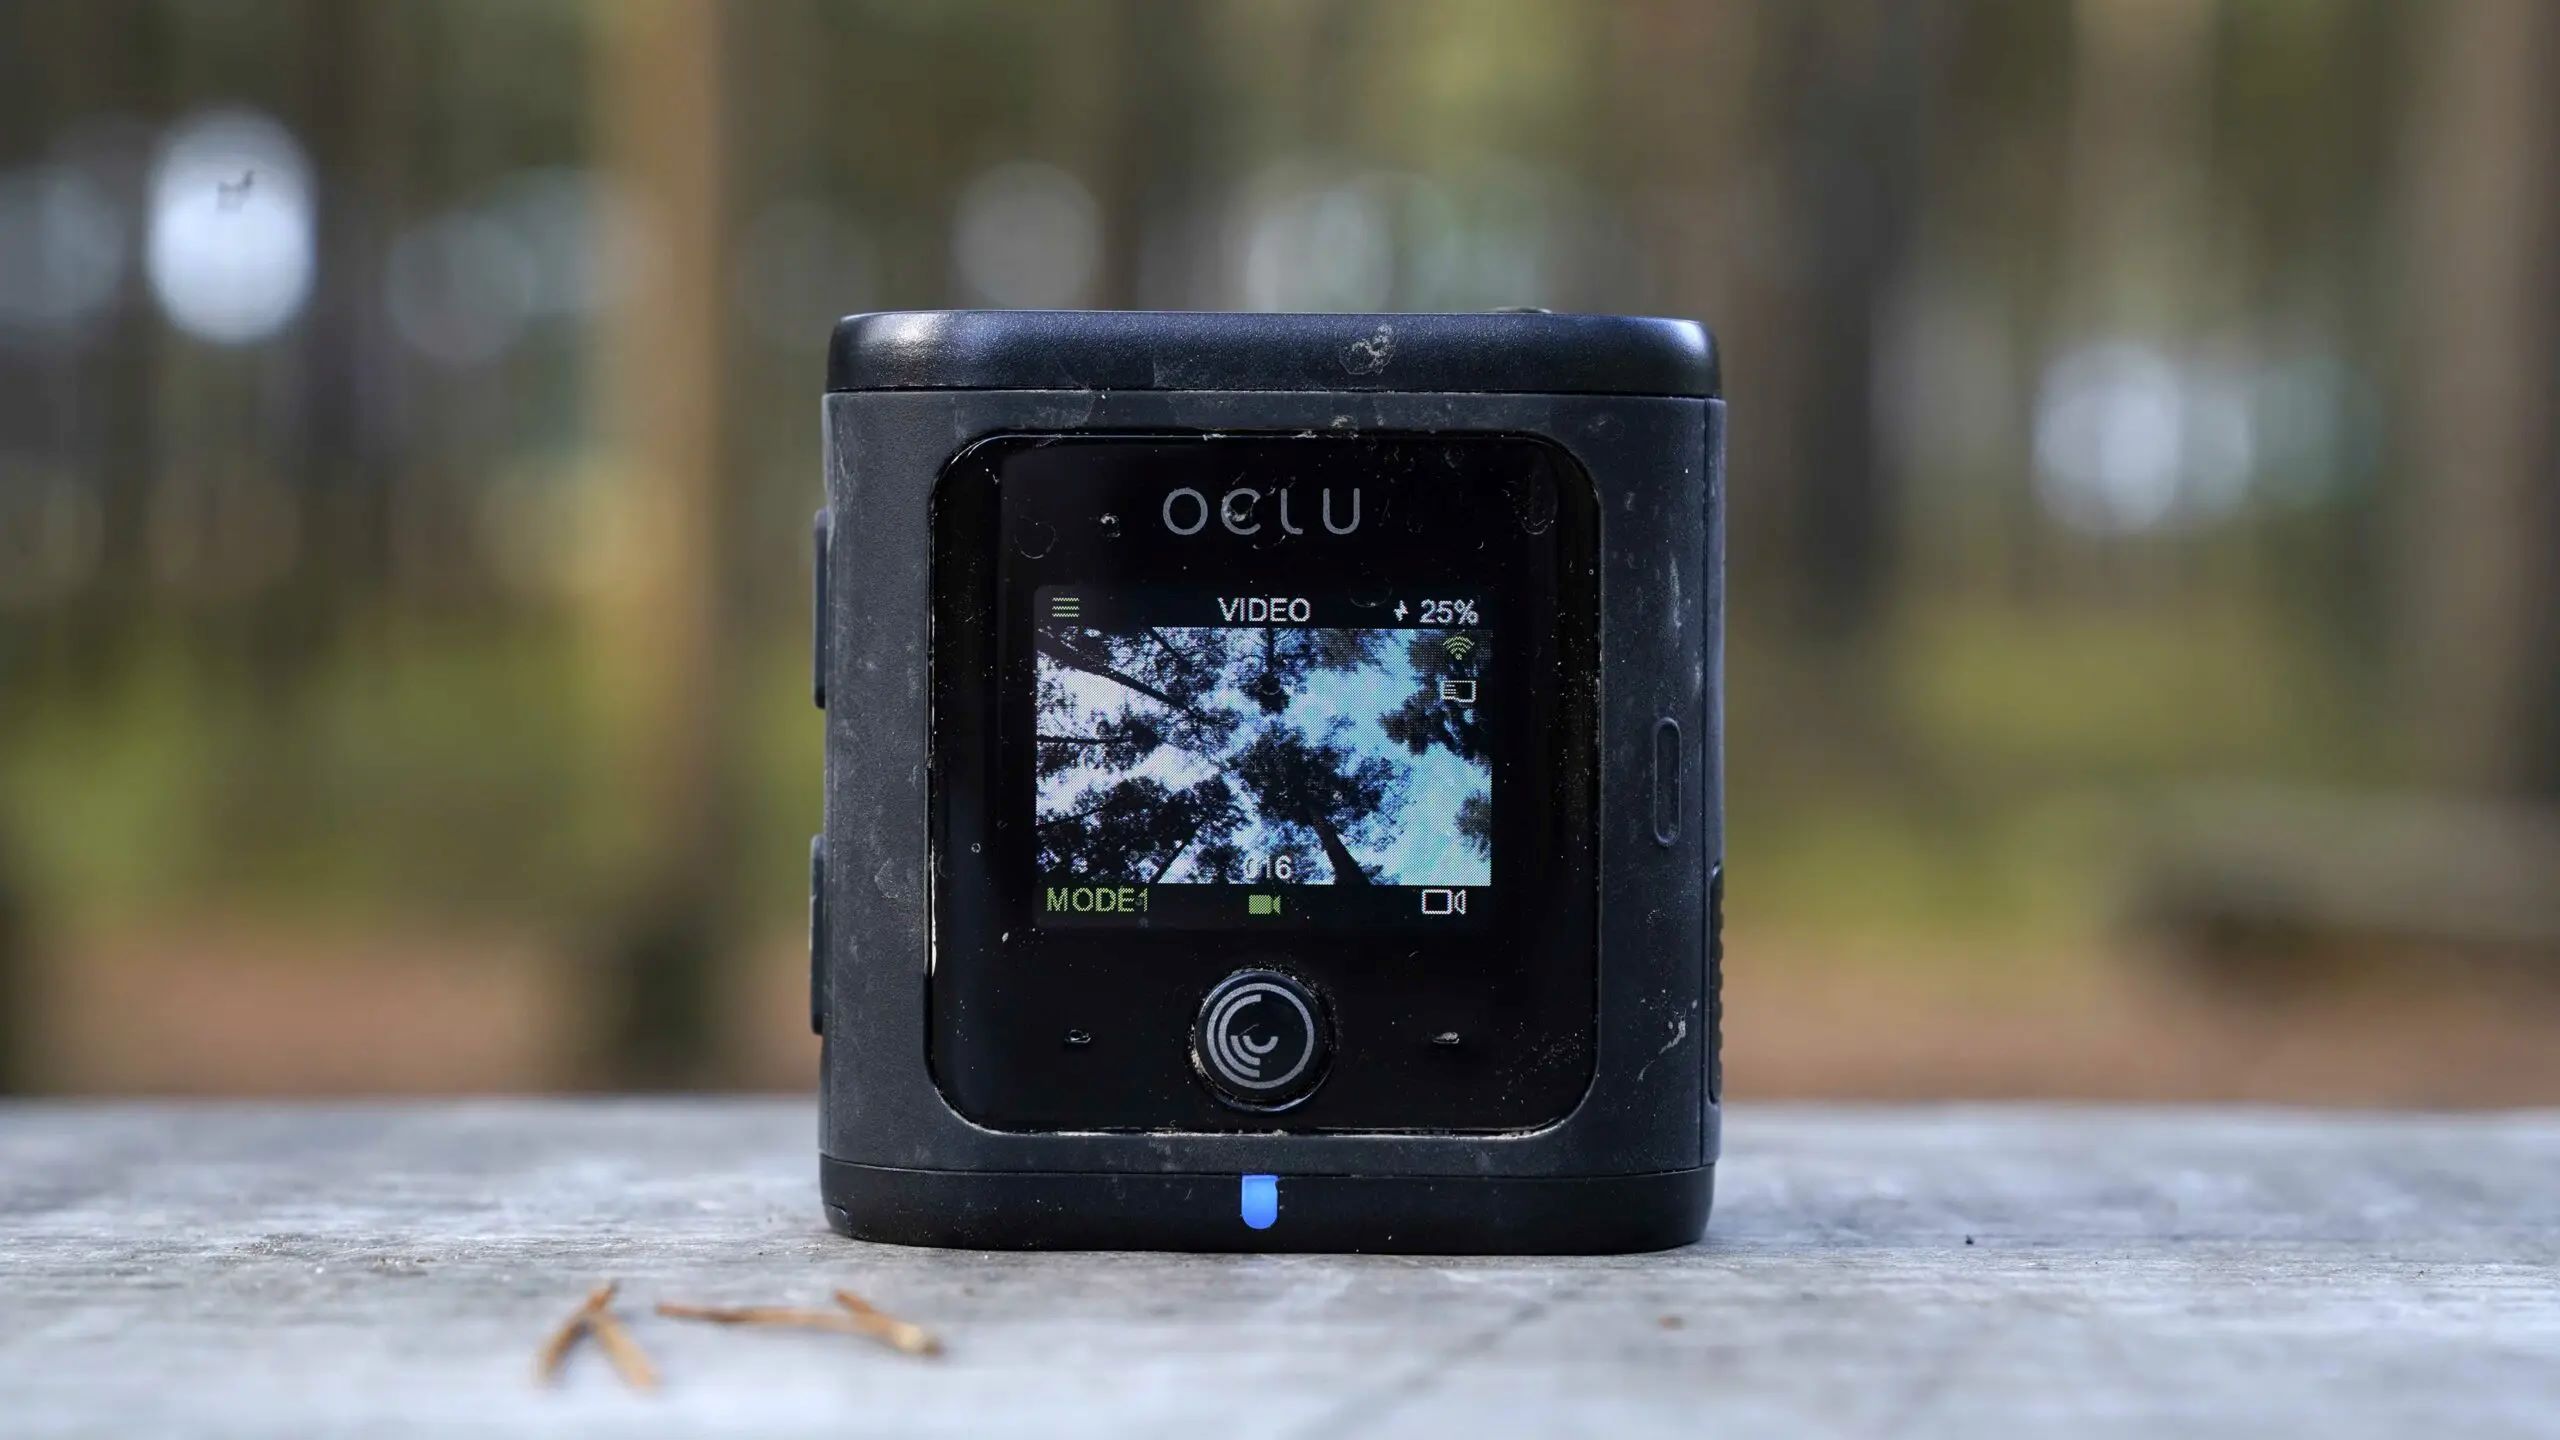 At What Speed Does The Oclu Action Camera Capture 4K UHD Video